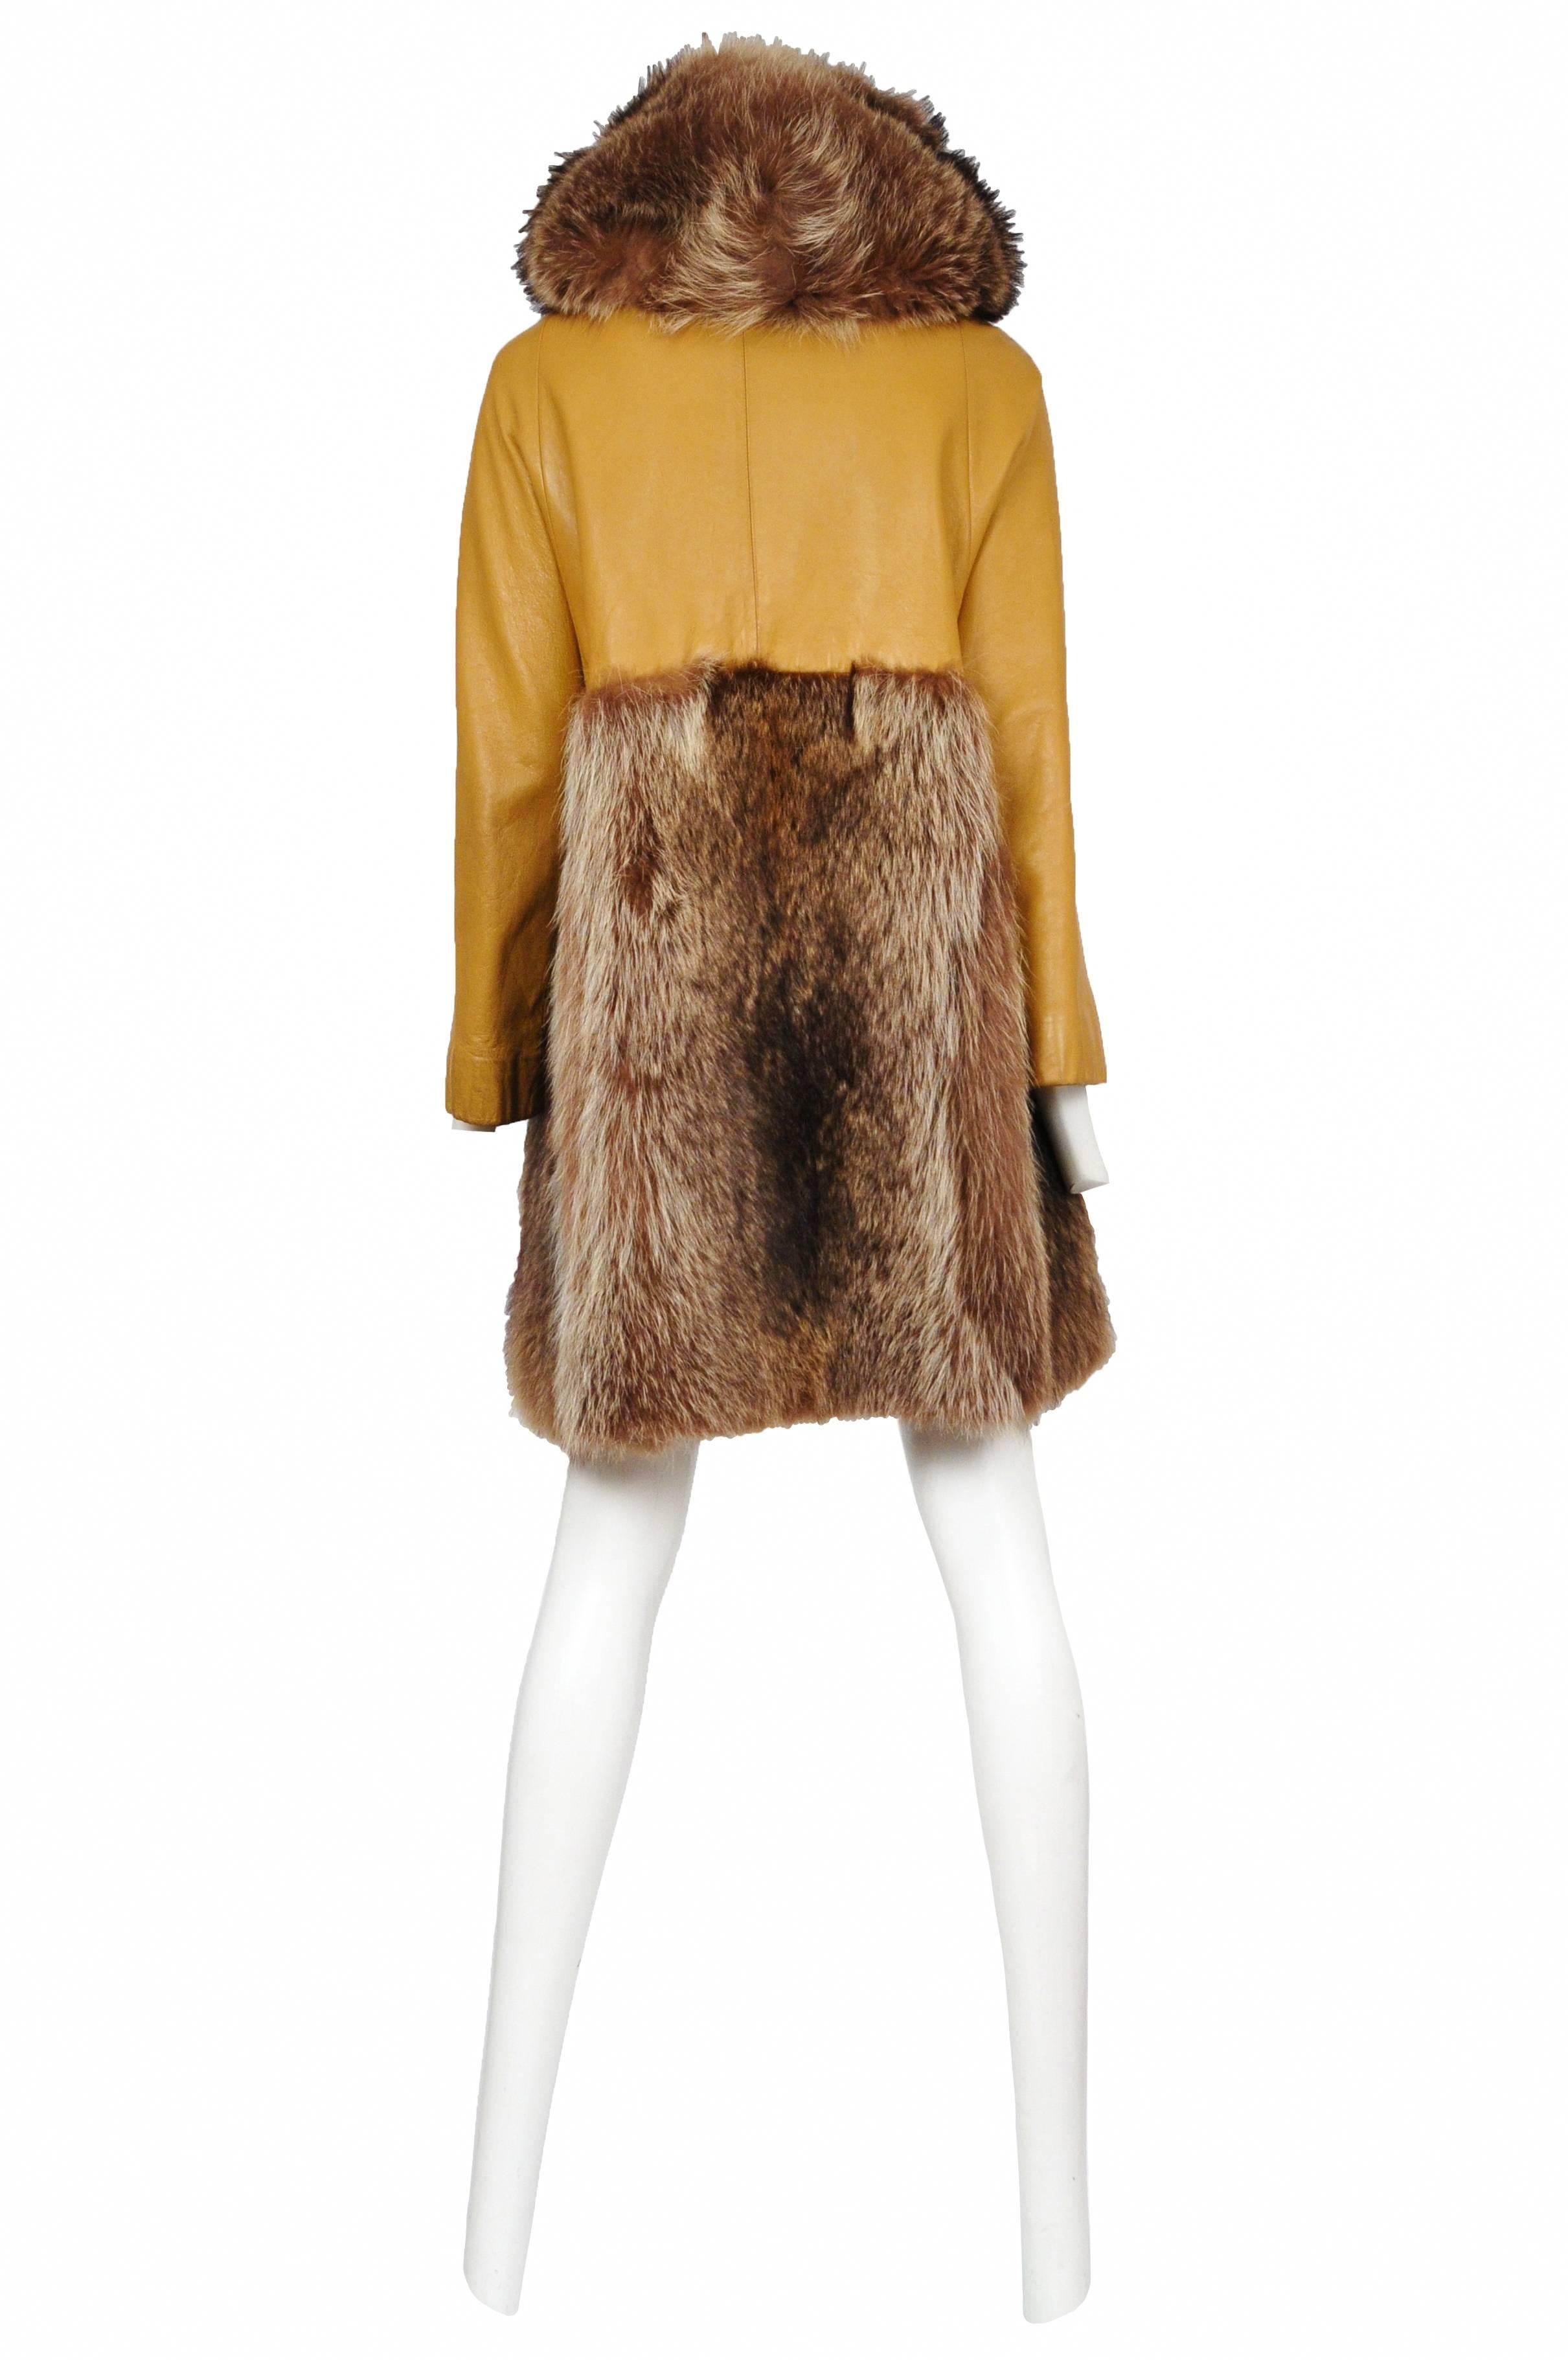 Vintage Bonnie Cashin mustard yellow leather coat featuring brass toggle closures, fur from the waist down and fur at the hood. 